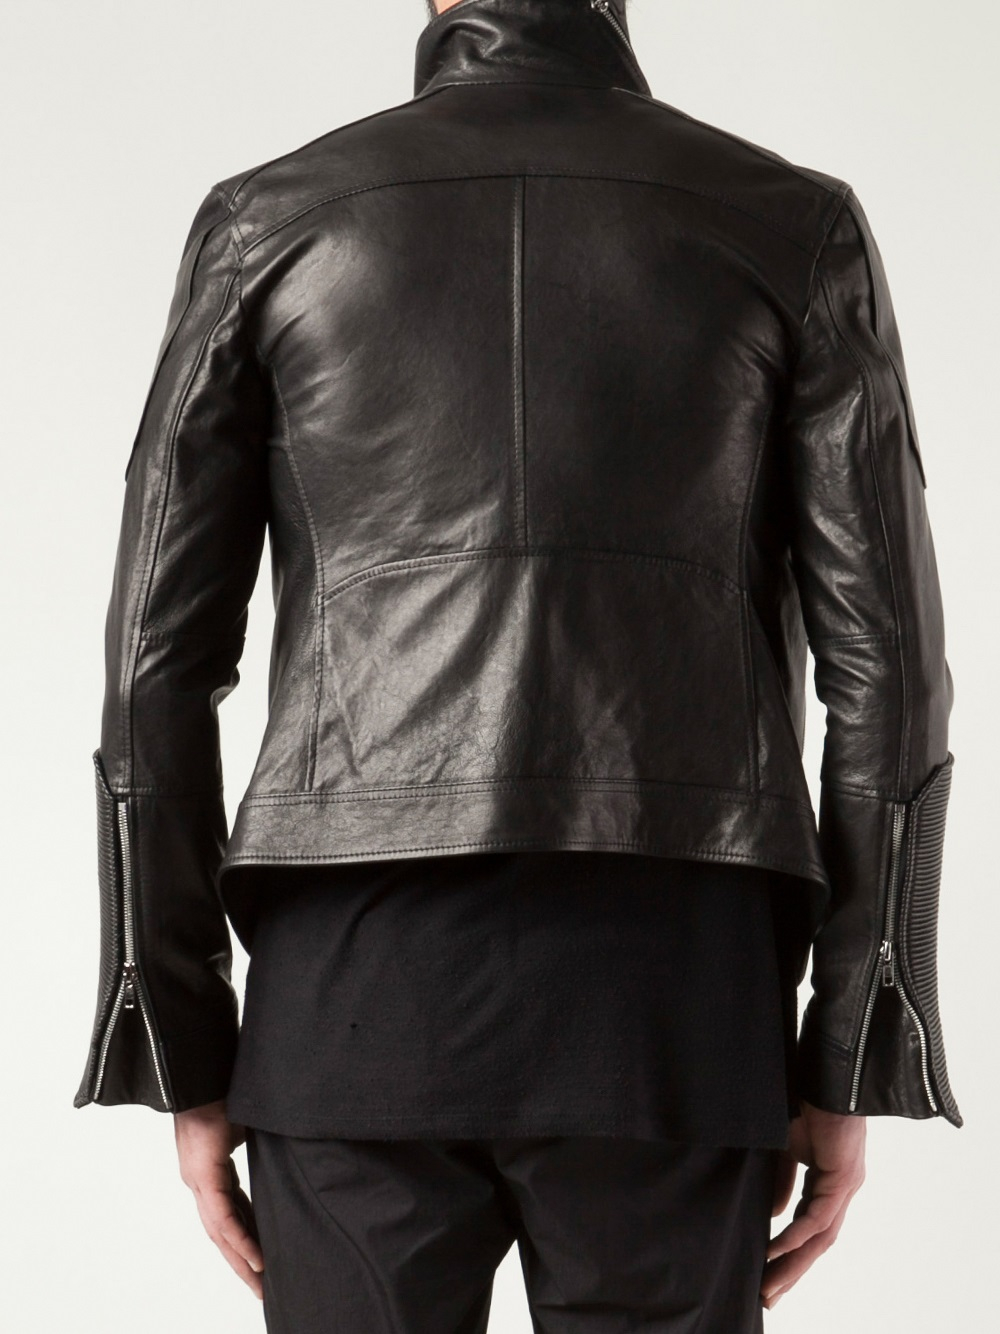 Lyst - D.Gnak High Collar Leather Jacket in Black for Men